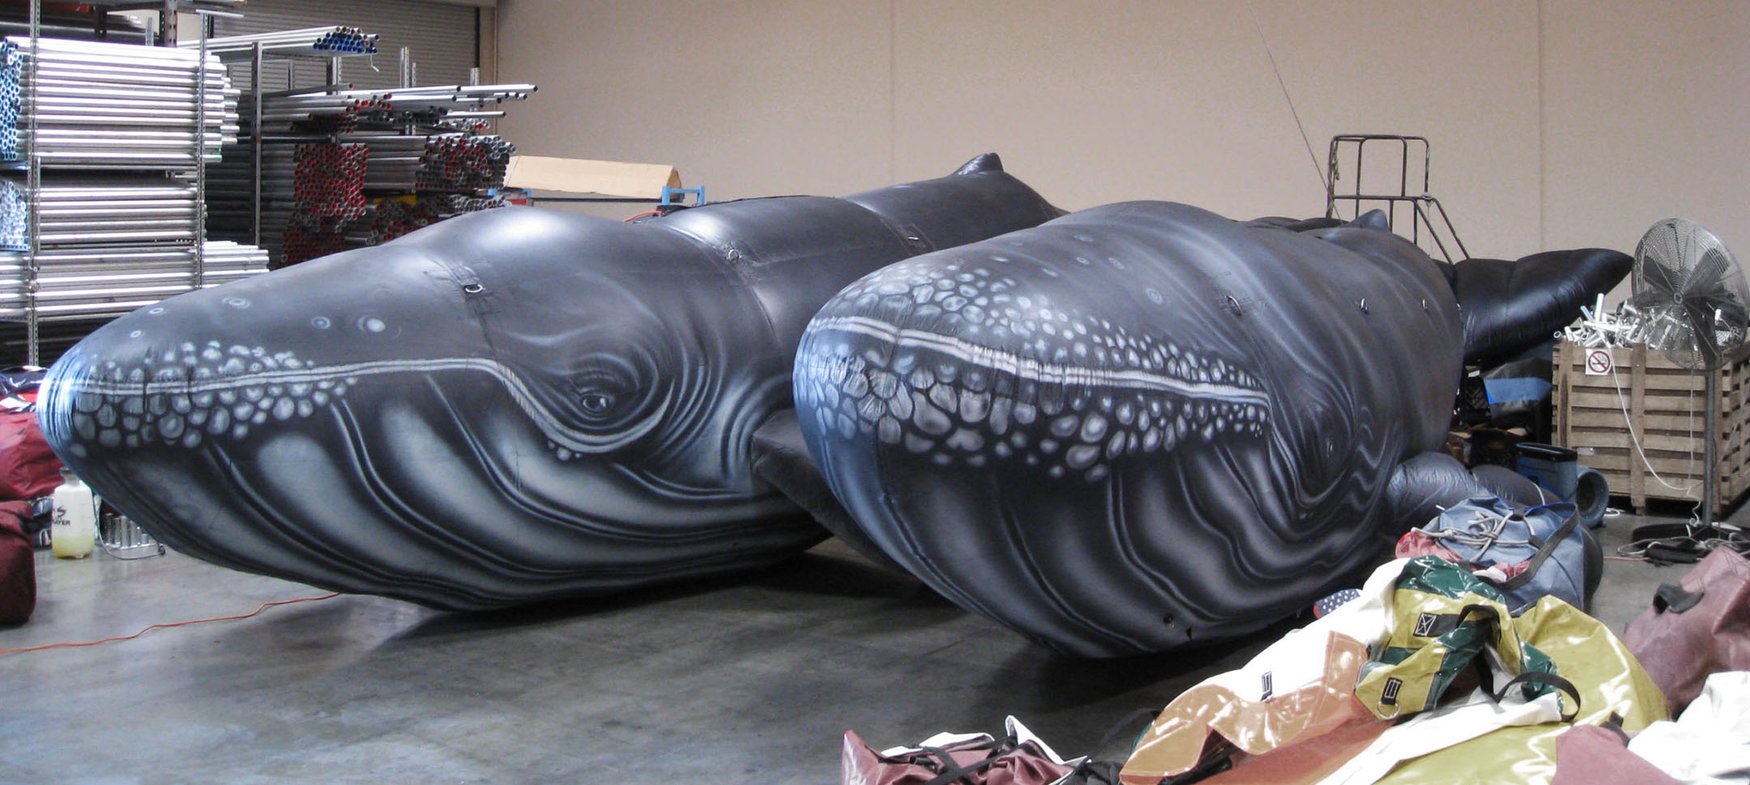 giant-inflatable-whales-warehouse